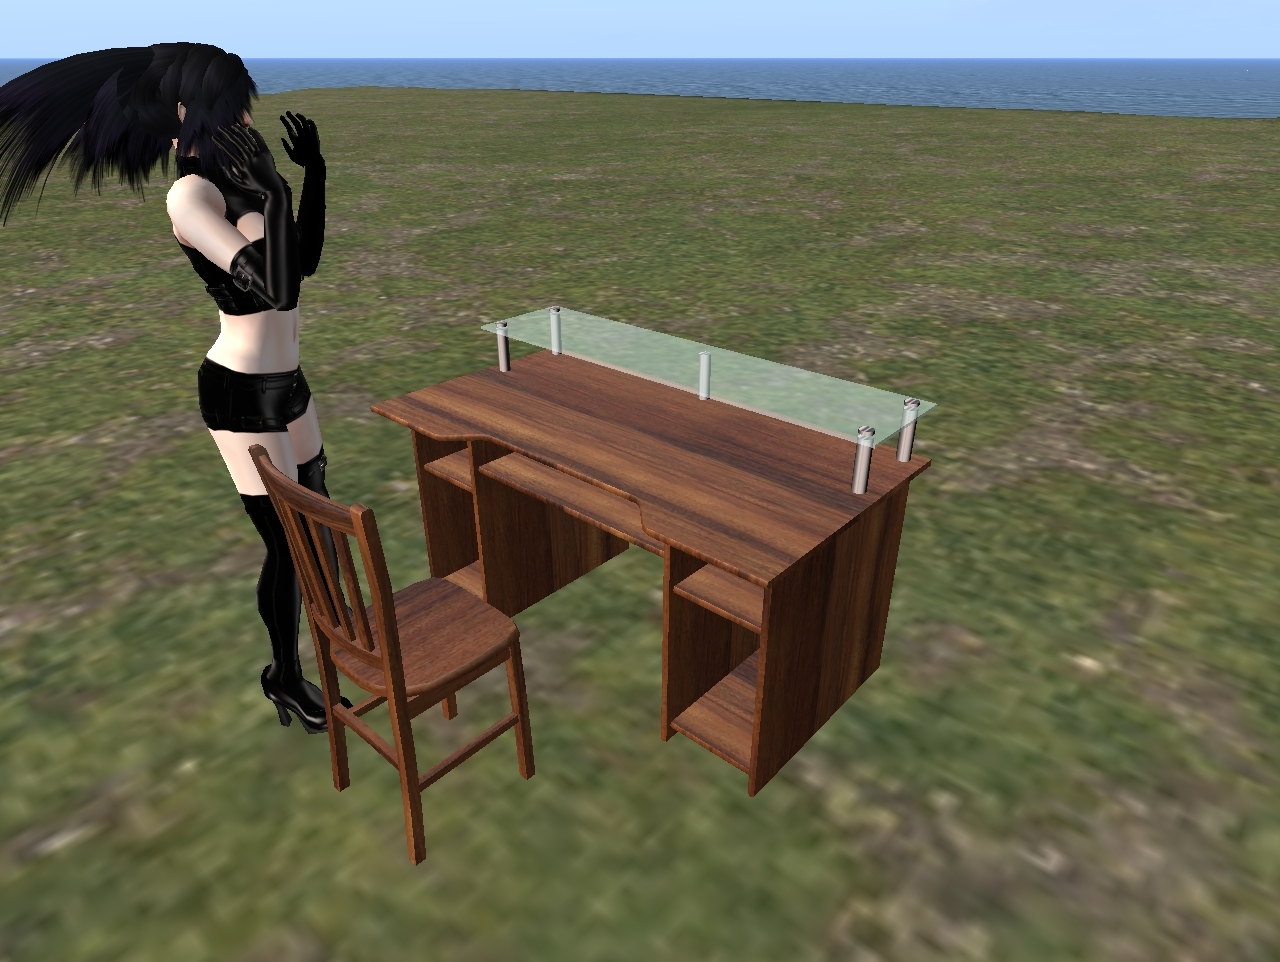 secondlife games like chitchat